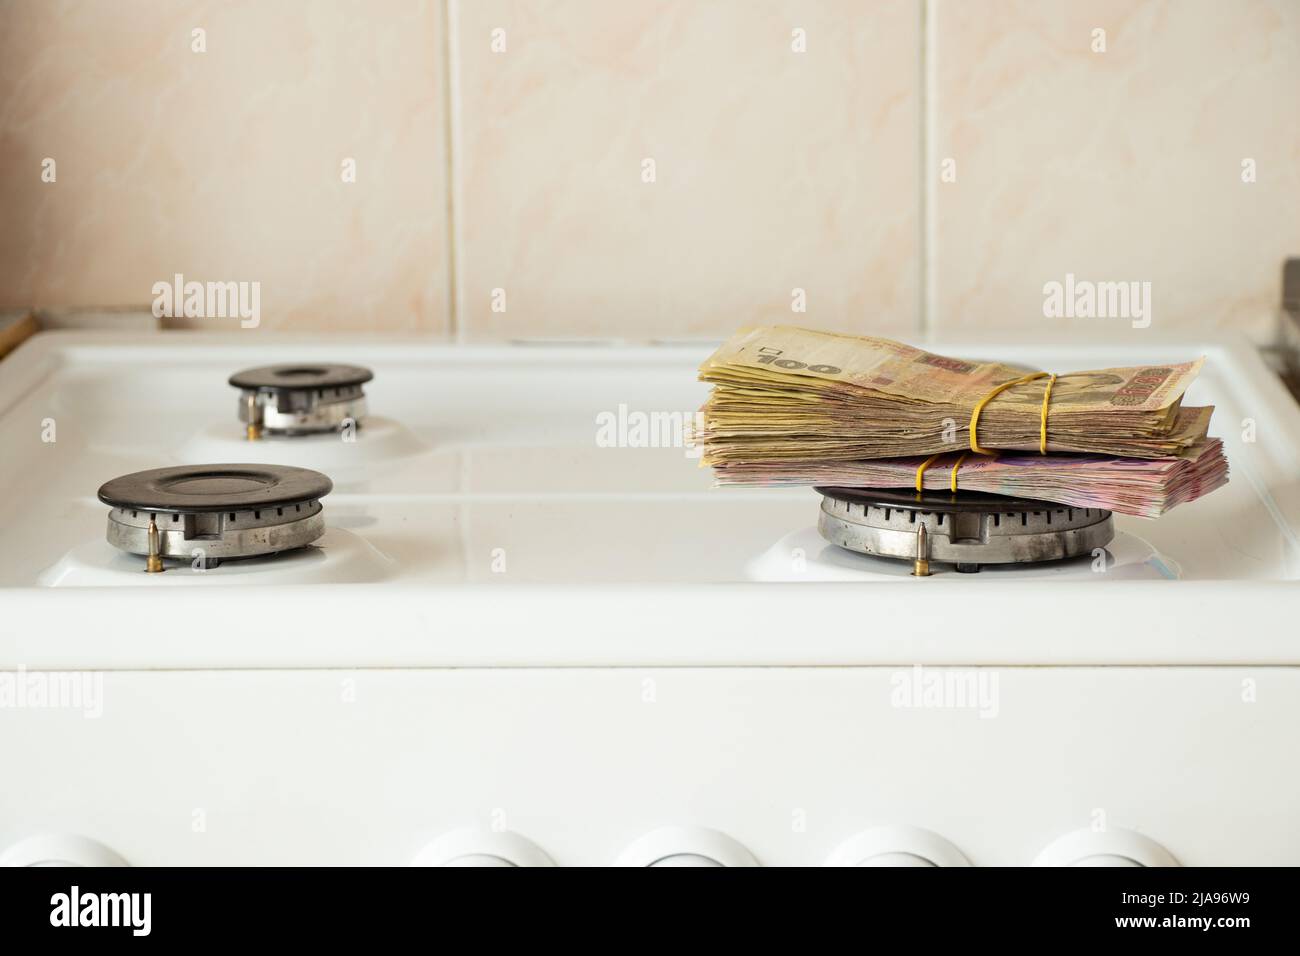 One hundred and two hundred hryvnia lie on a gas stove in the kitchen, Ukrainian hryvnia and gas, finance and economics, money and sanctions Stock Photo